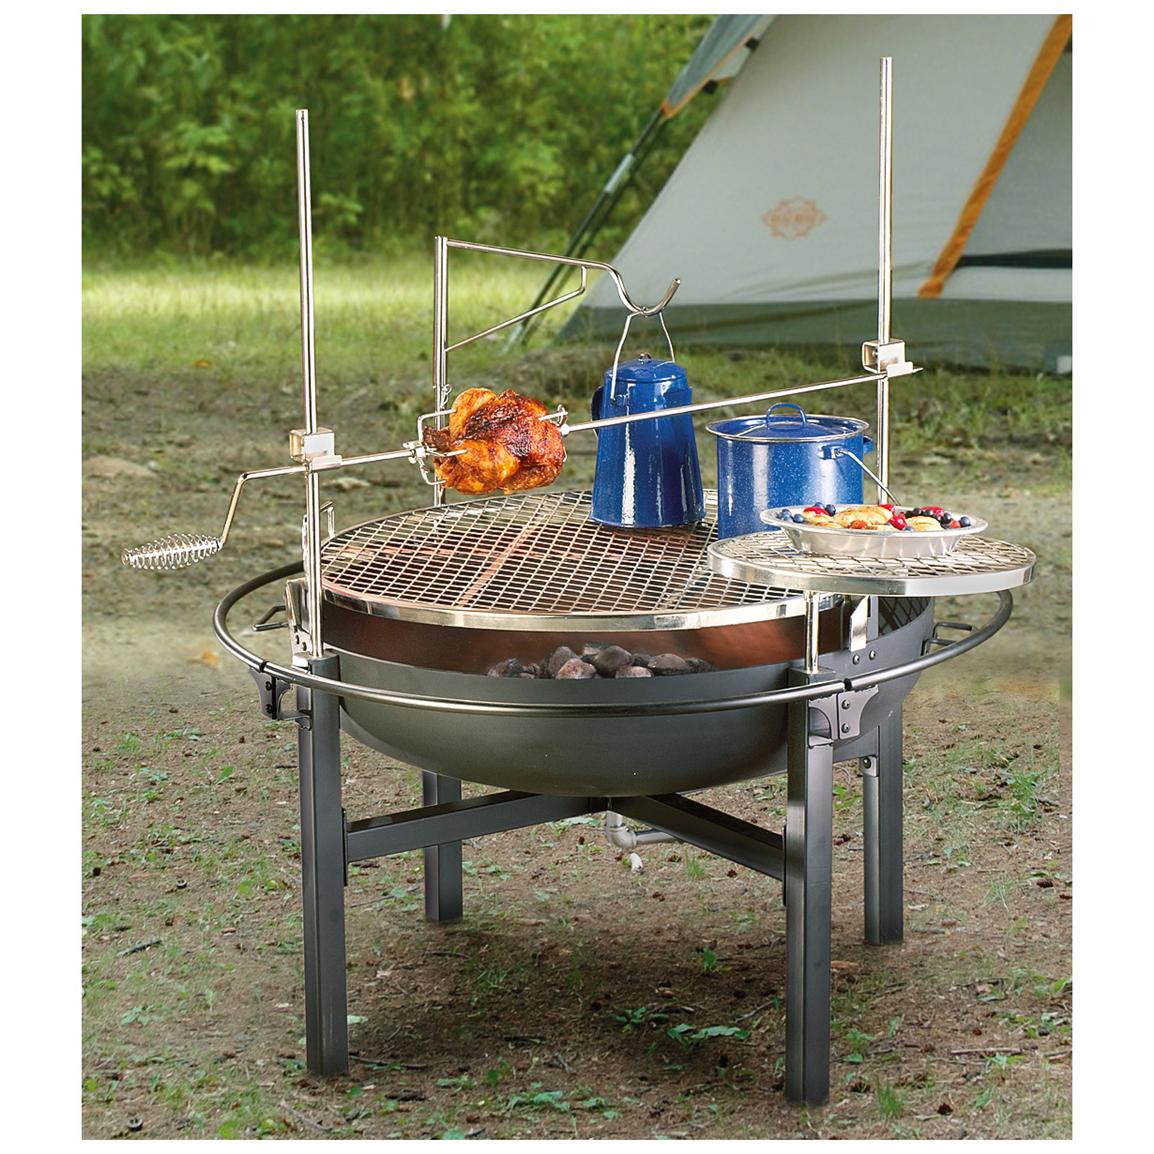 Cowboy Fire Pit Rotisserie Grill, Outdoor Fire Pit Rotisserie